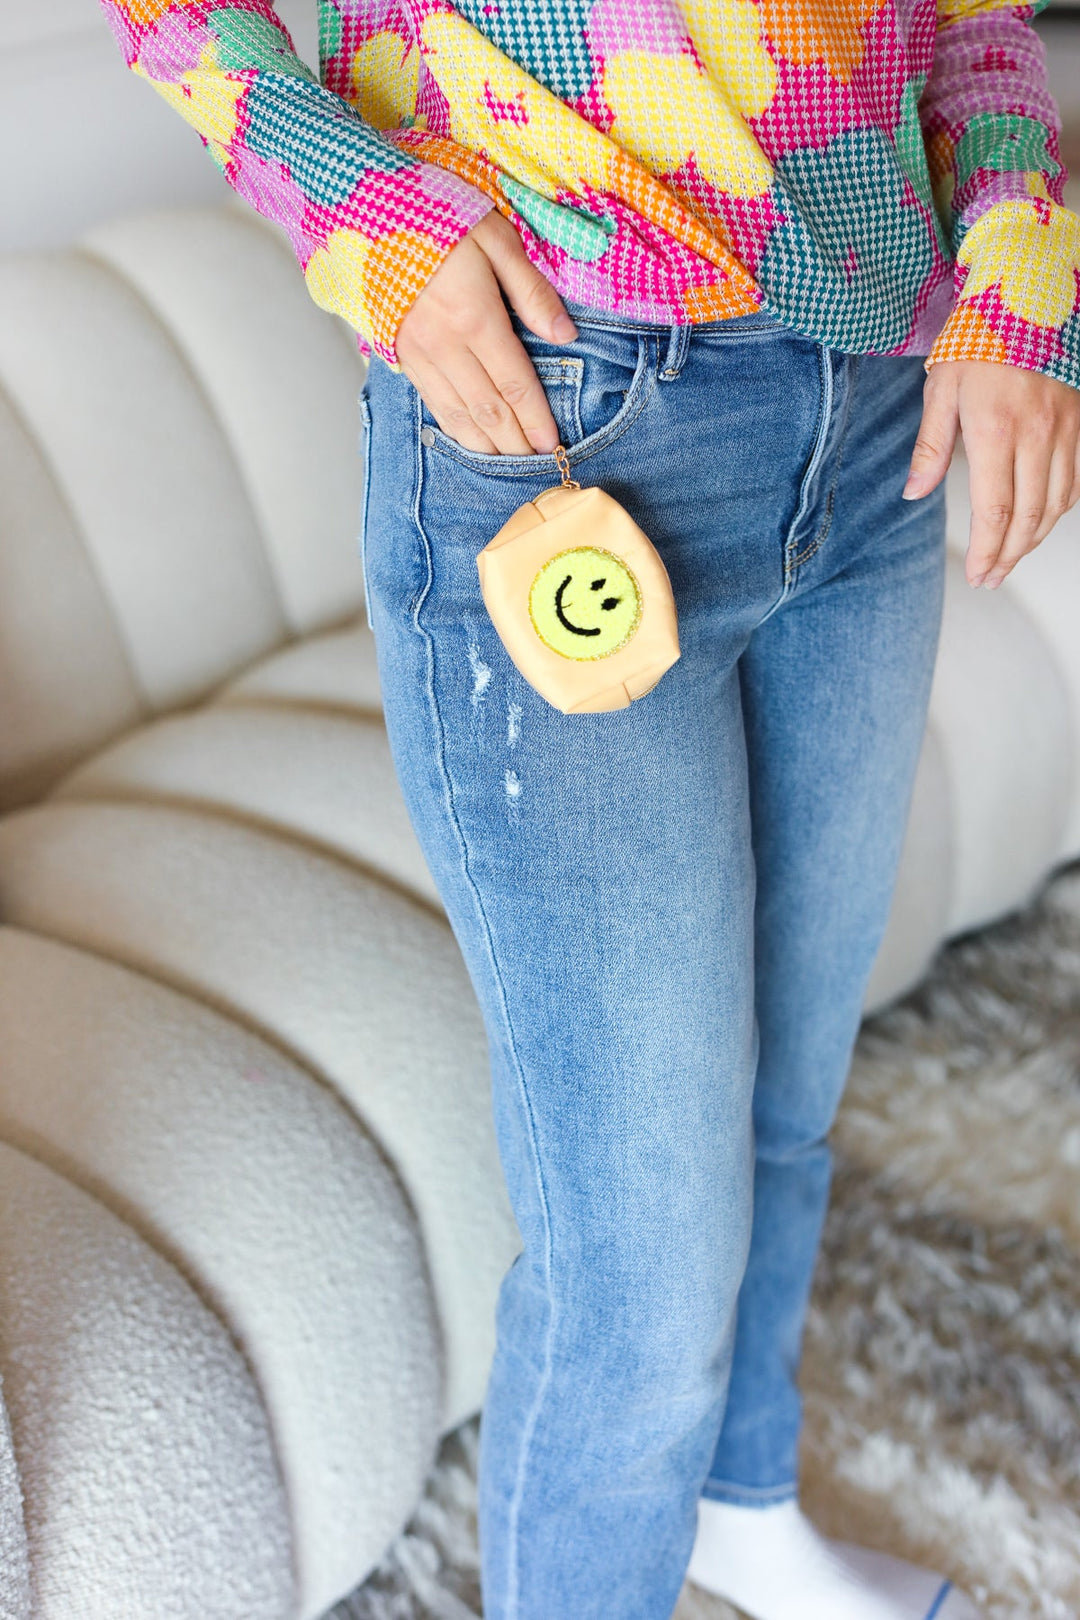 Happy Days - Smiley Face Coin Purse Keychain